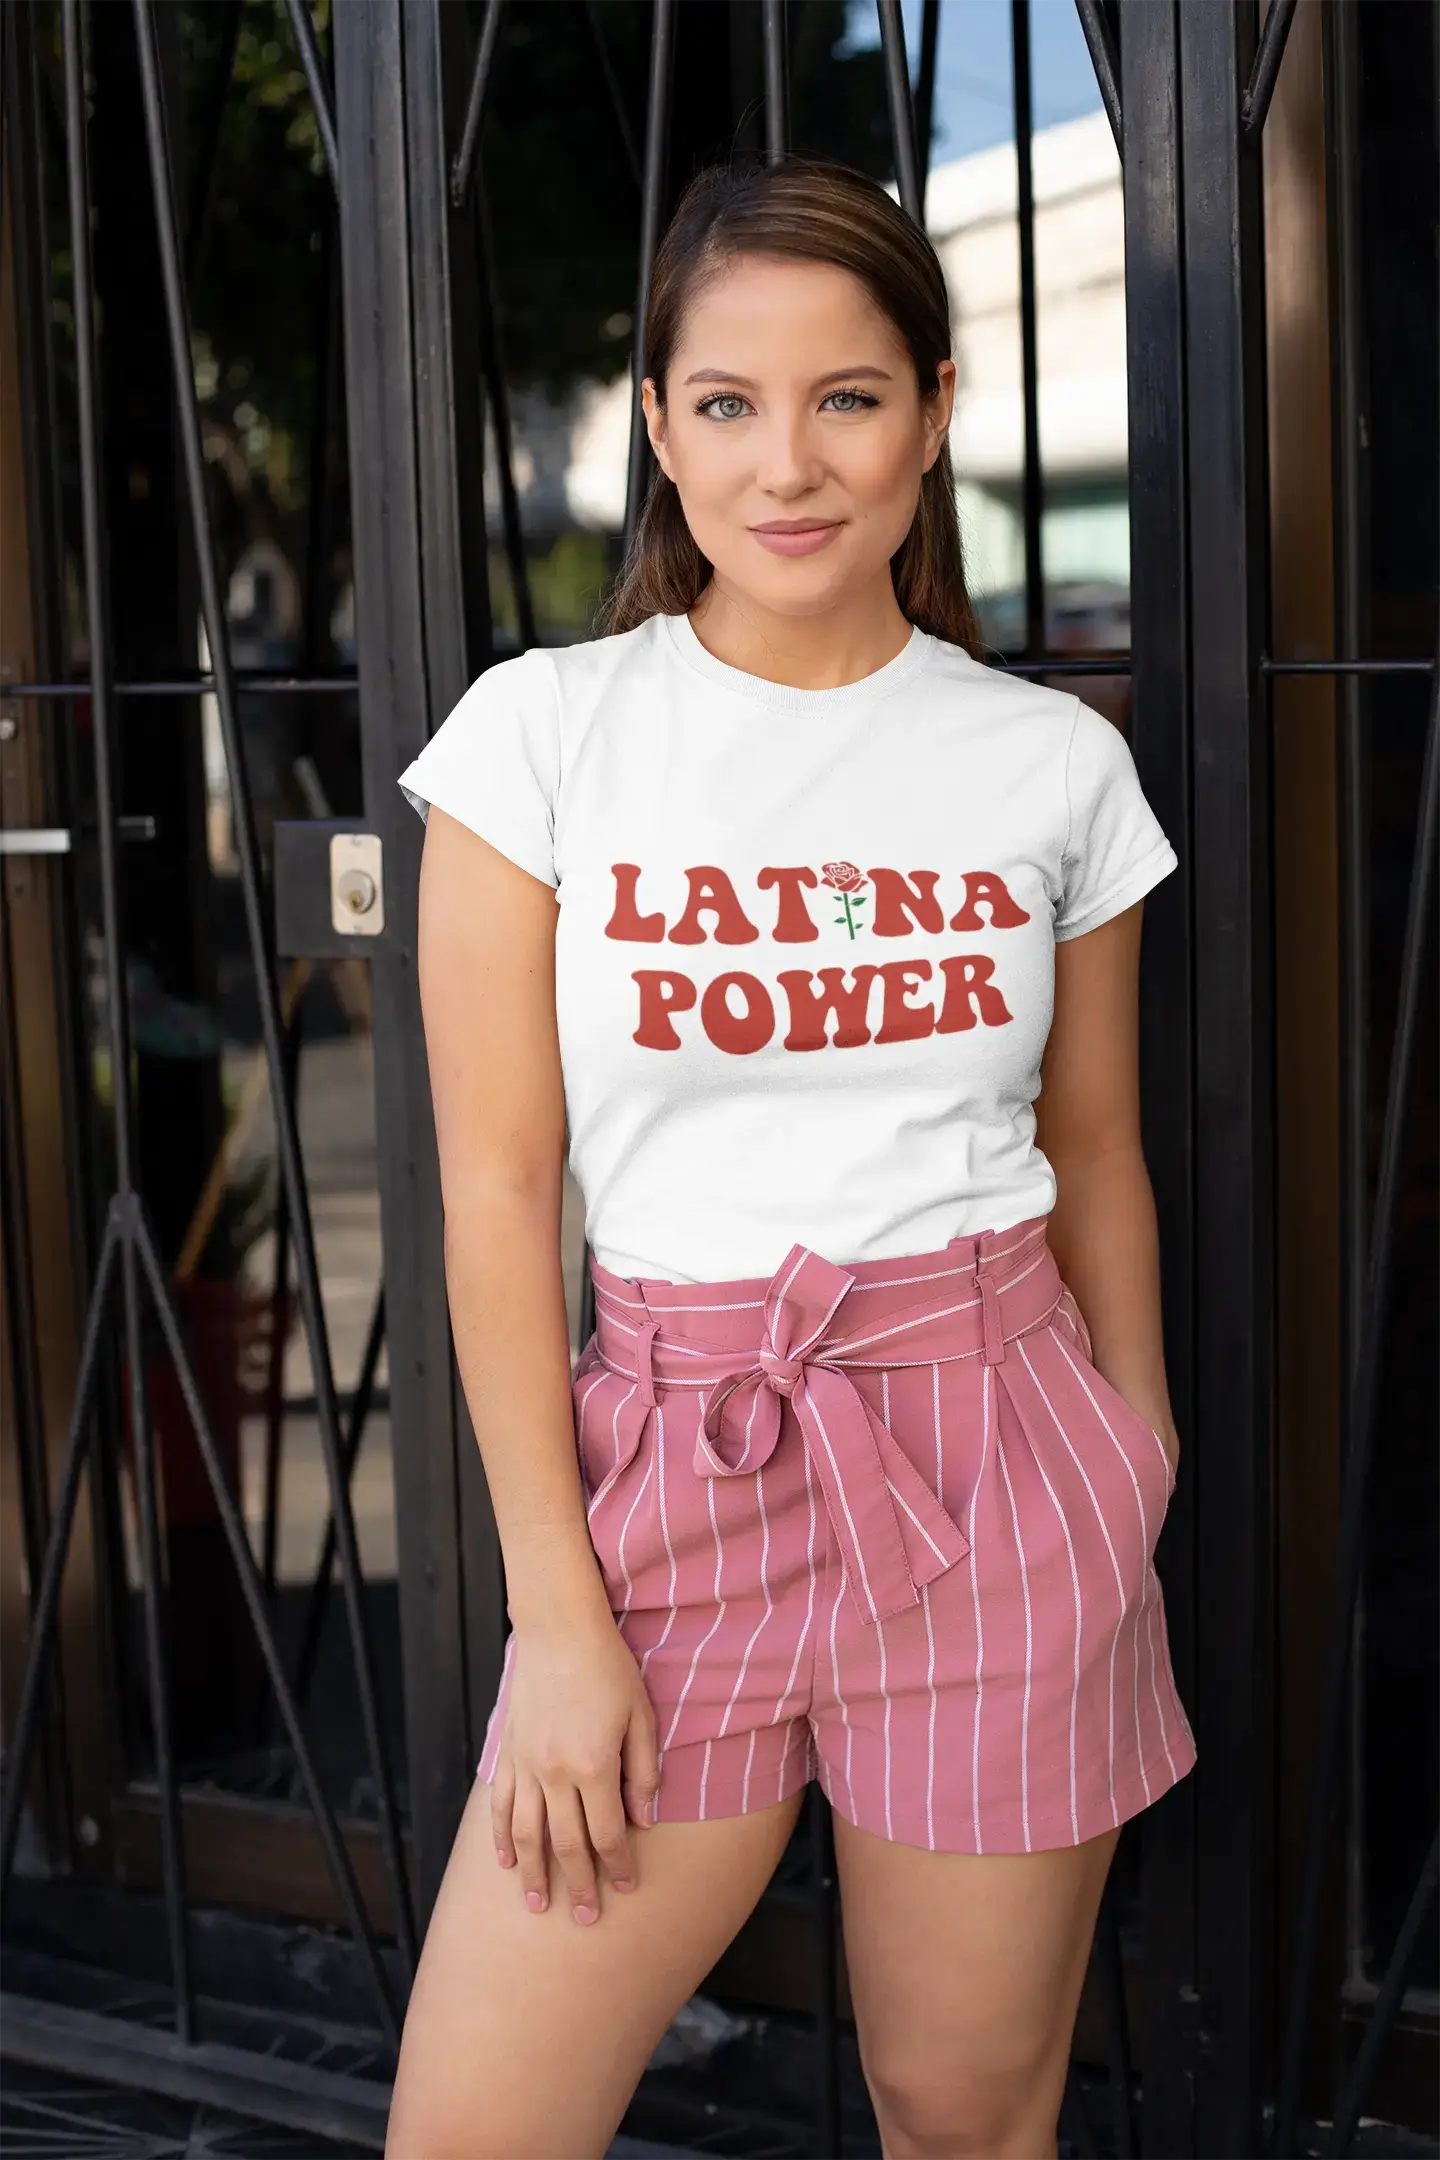 ULTRABASIC - Women's Low-Cut Round Neck T-Shirt Latina Power Printed Letters French Navy